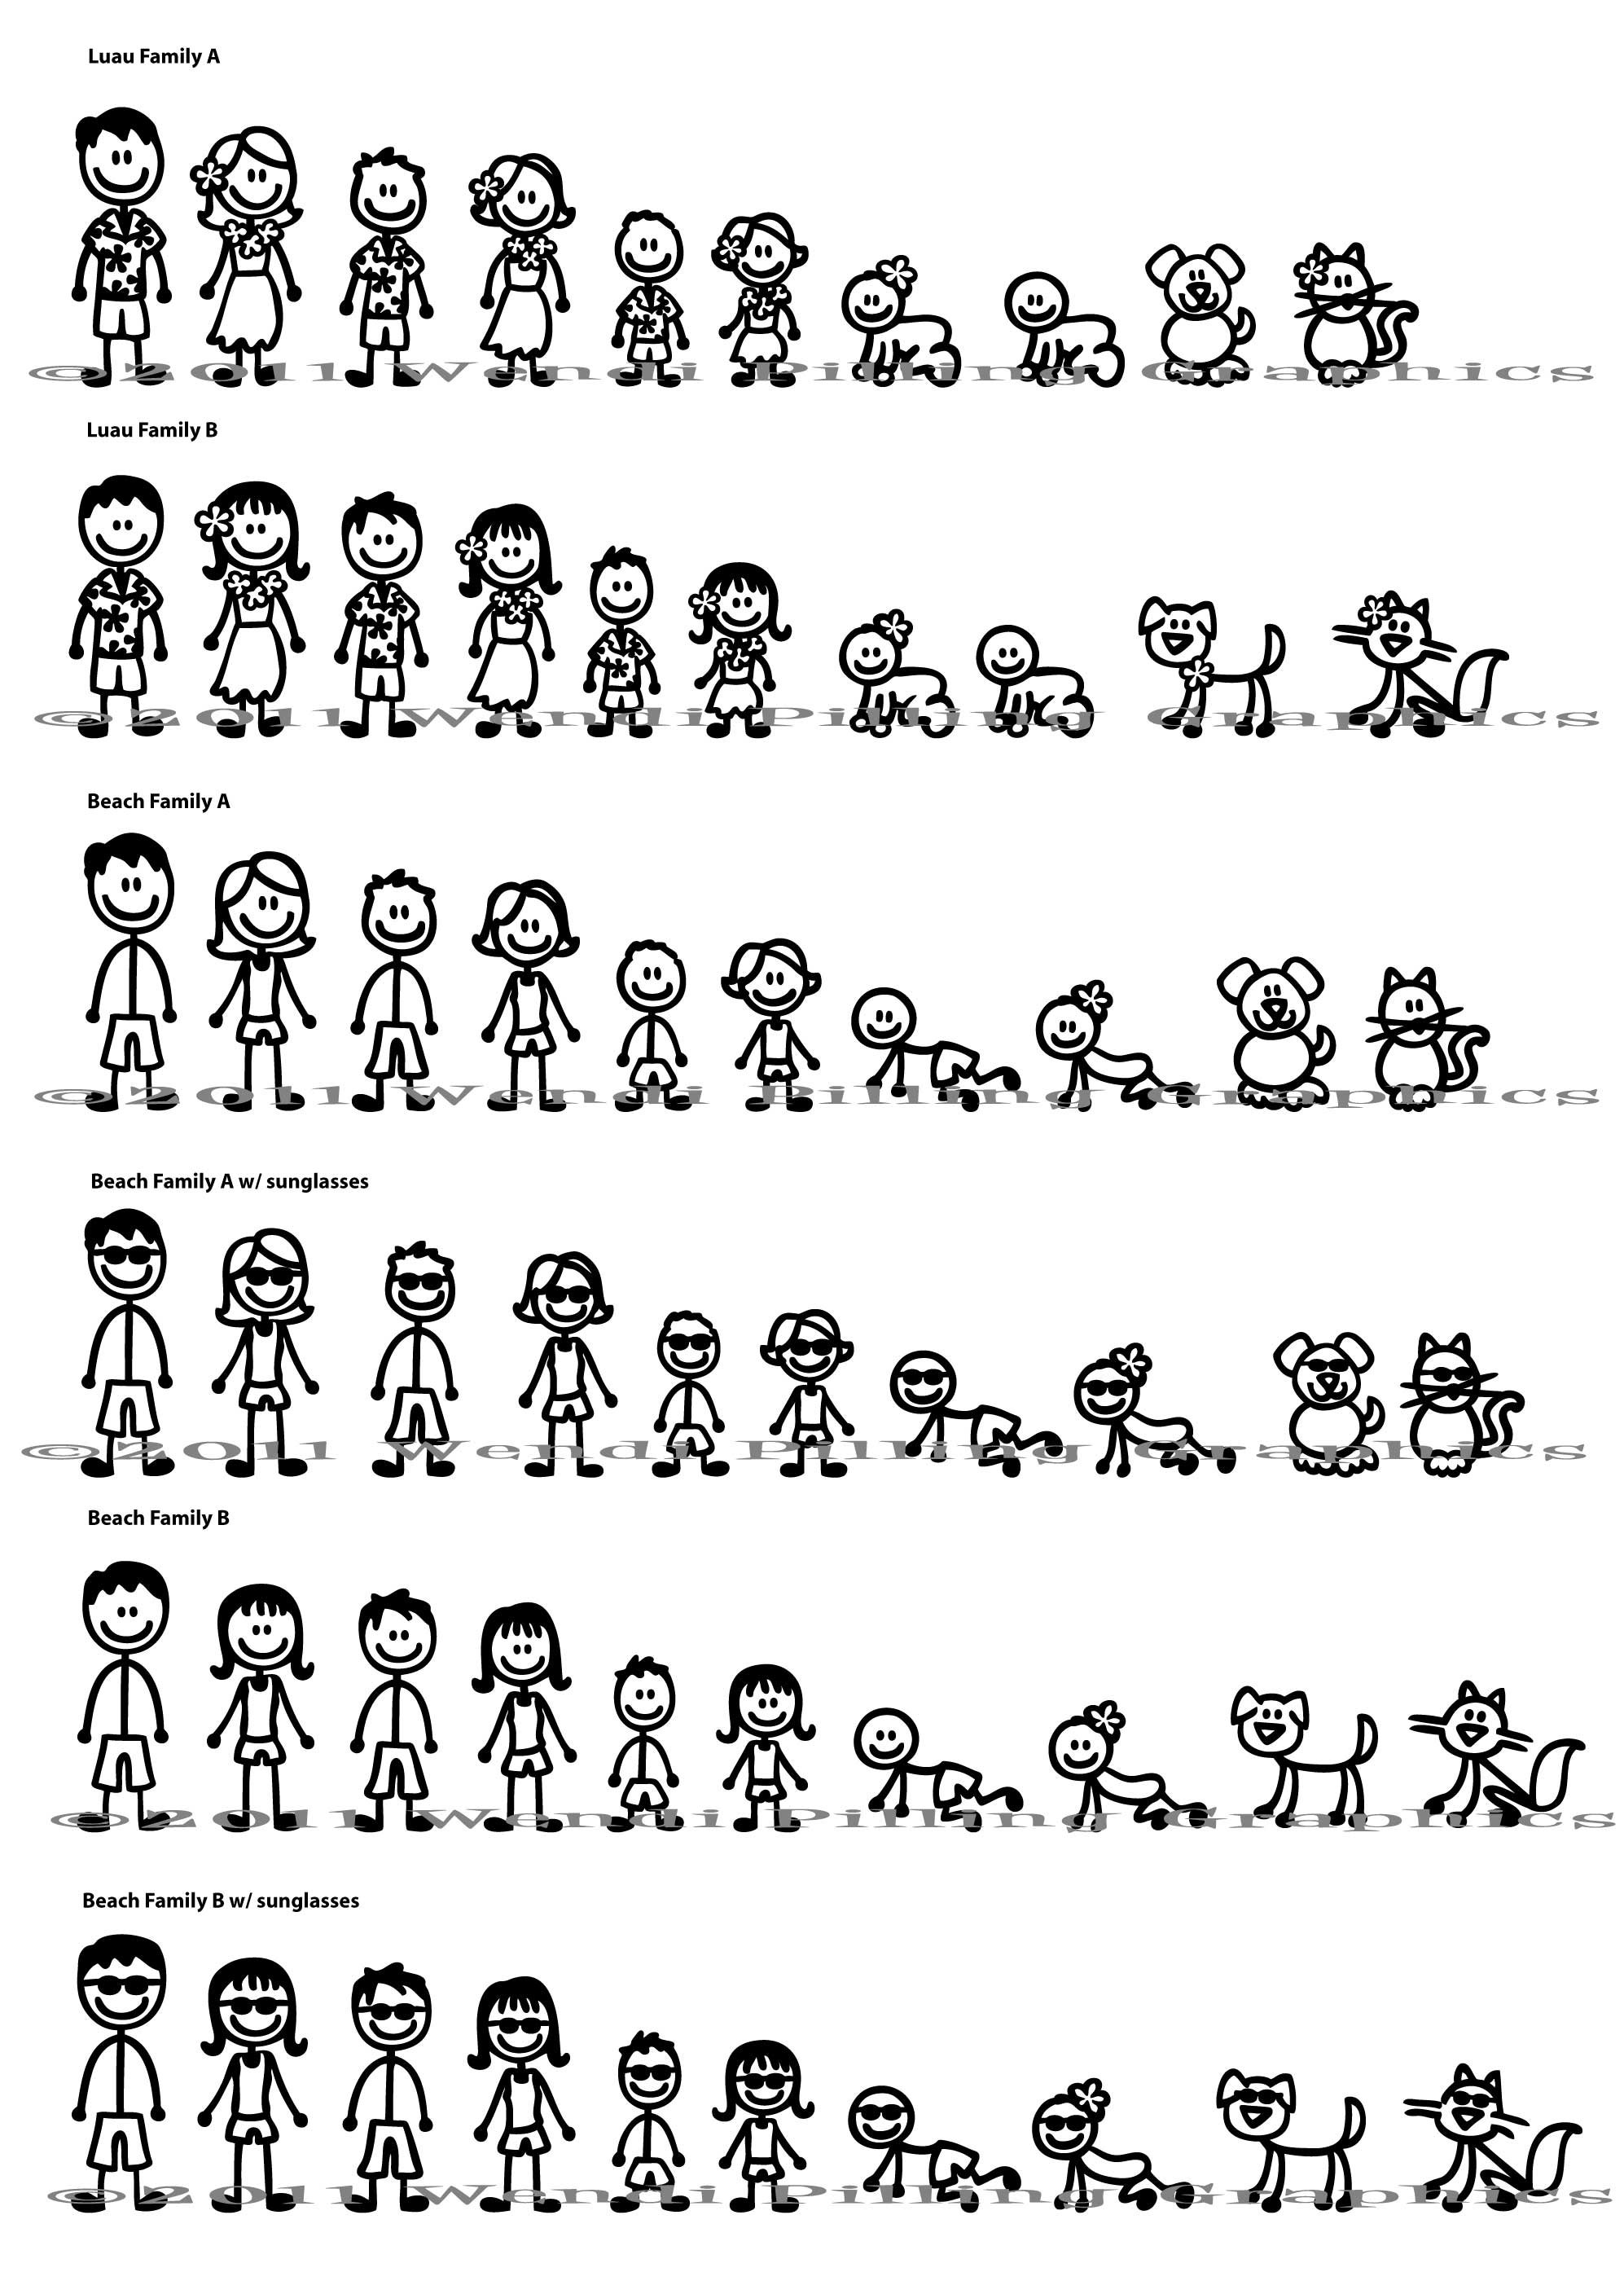 Free Stick People Family, Download Free Stick People Family png images